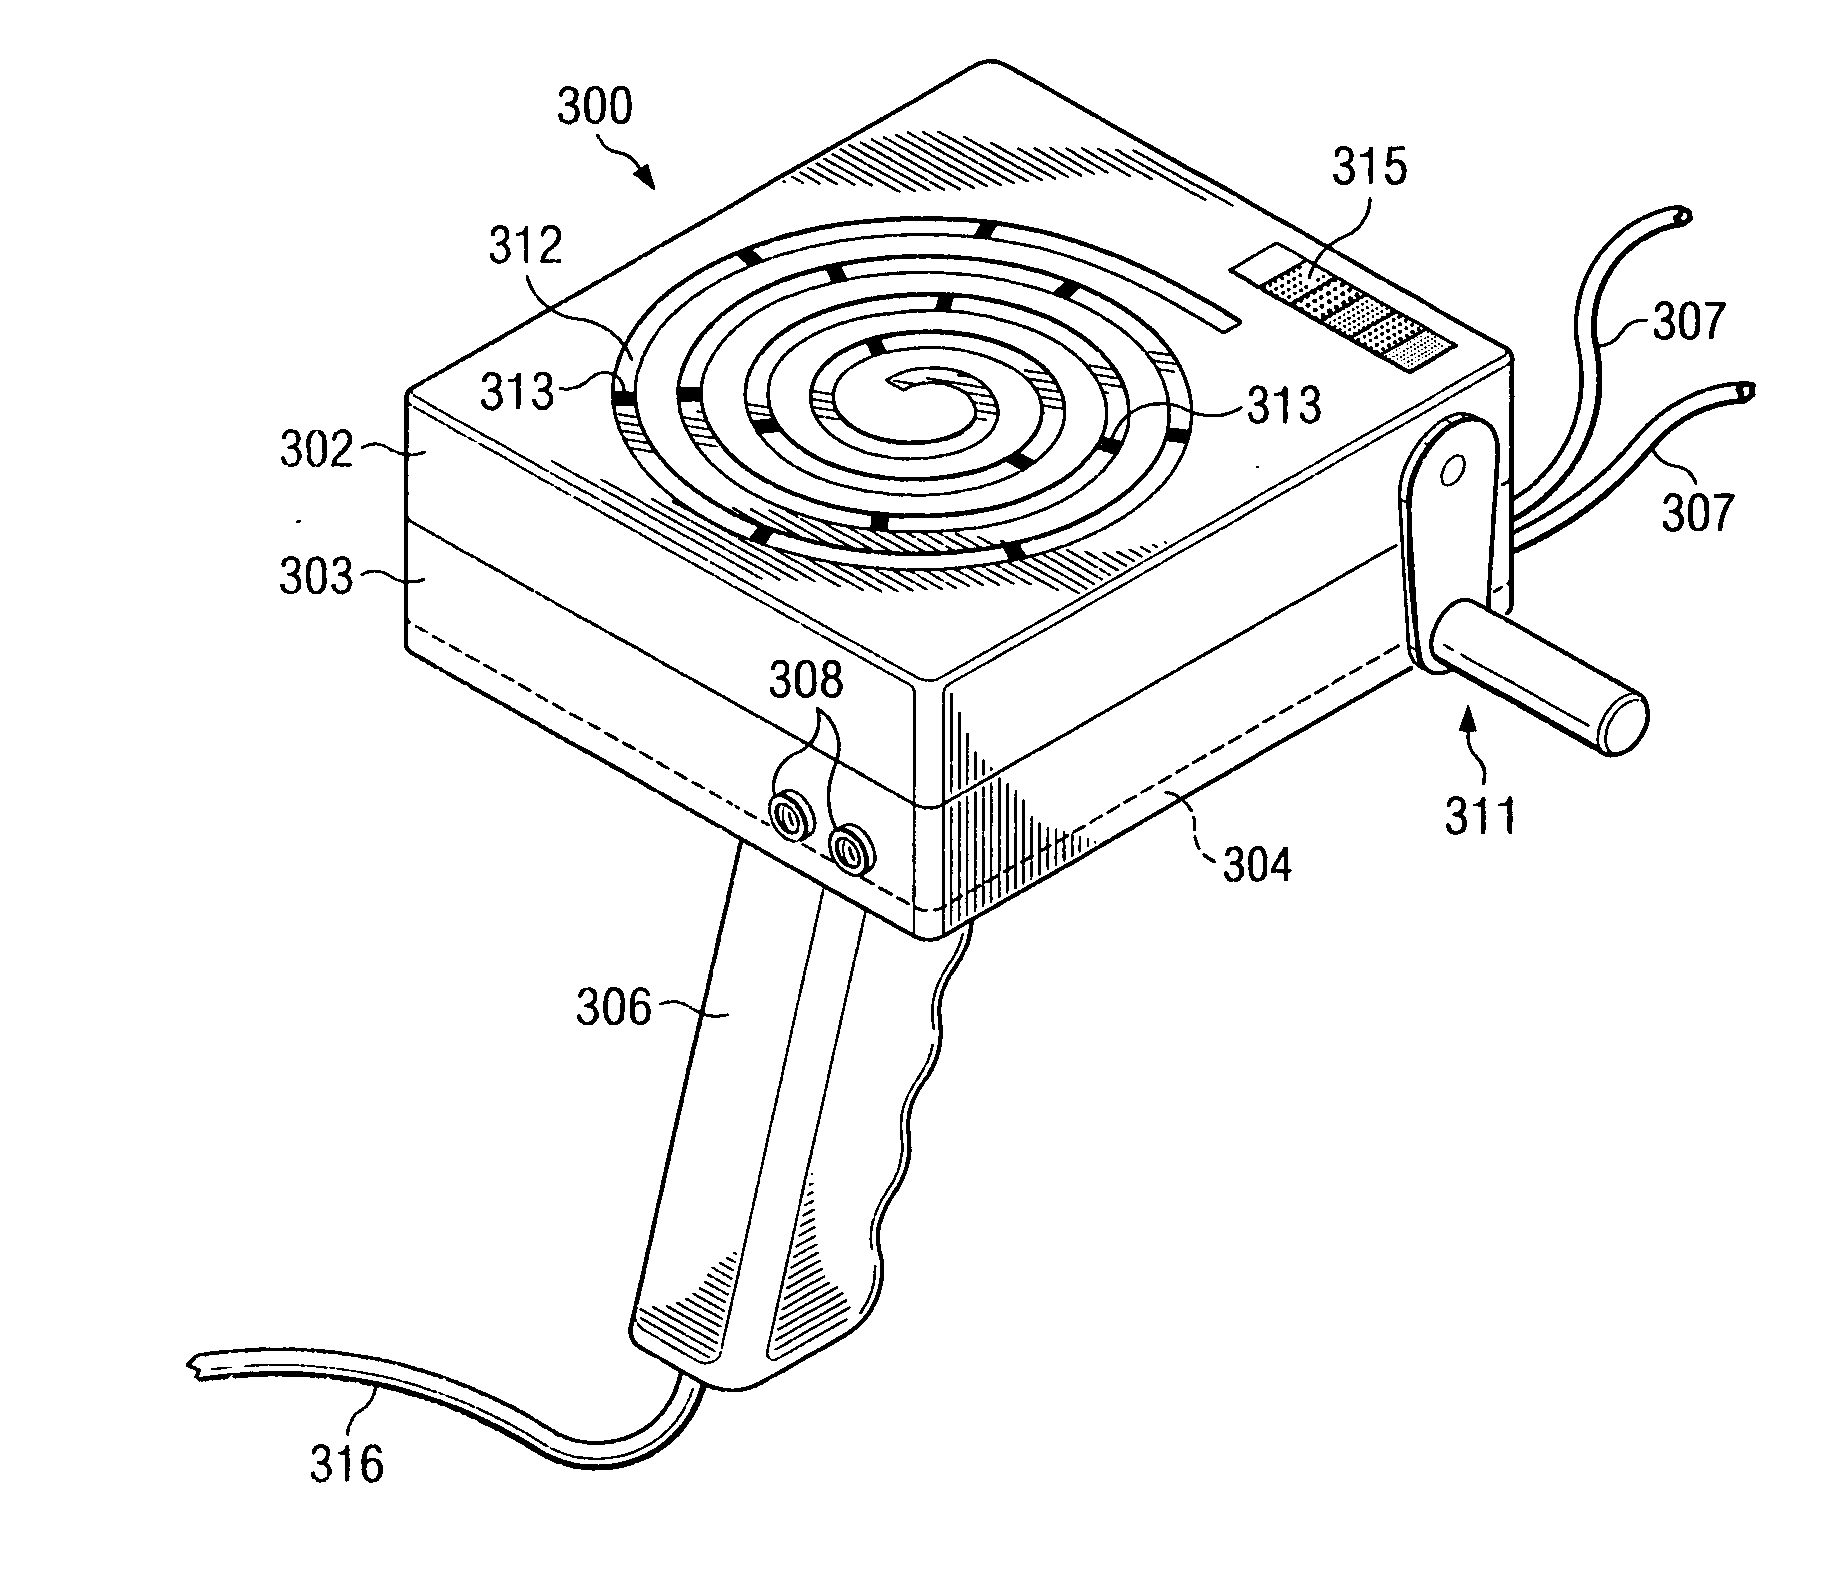 Apparatus and method for the dispensing of bone cement